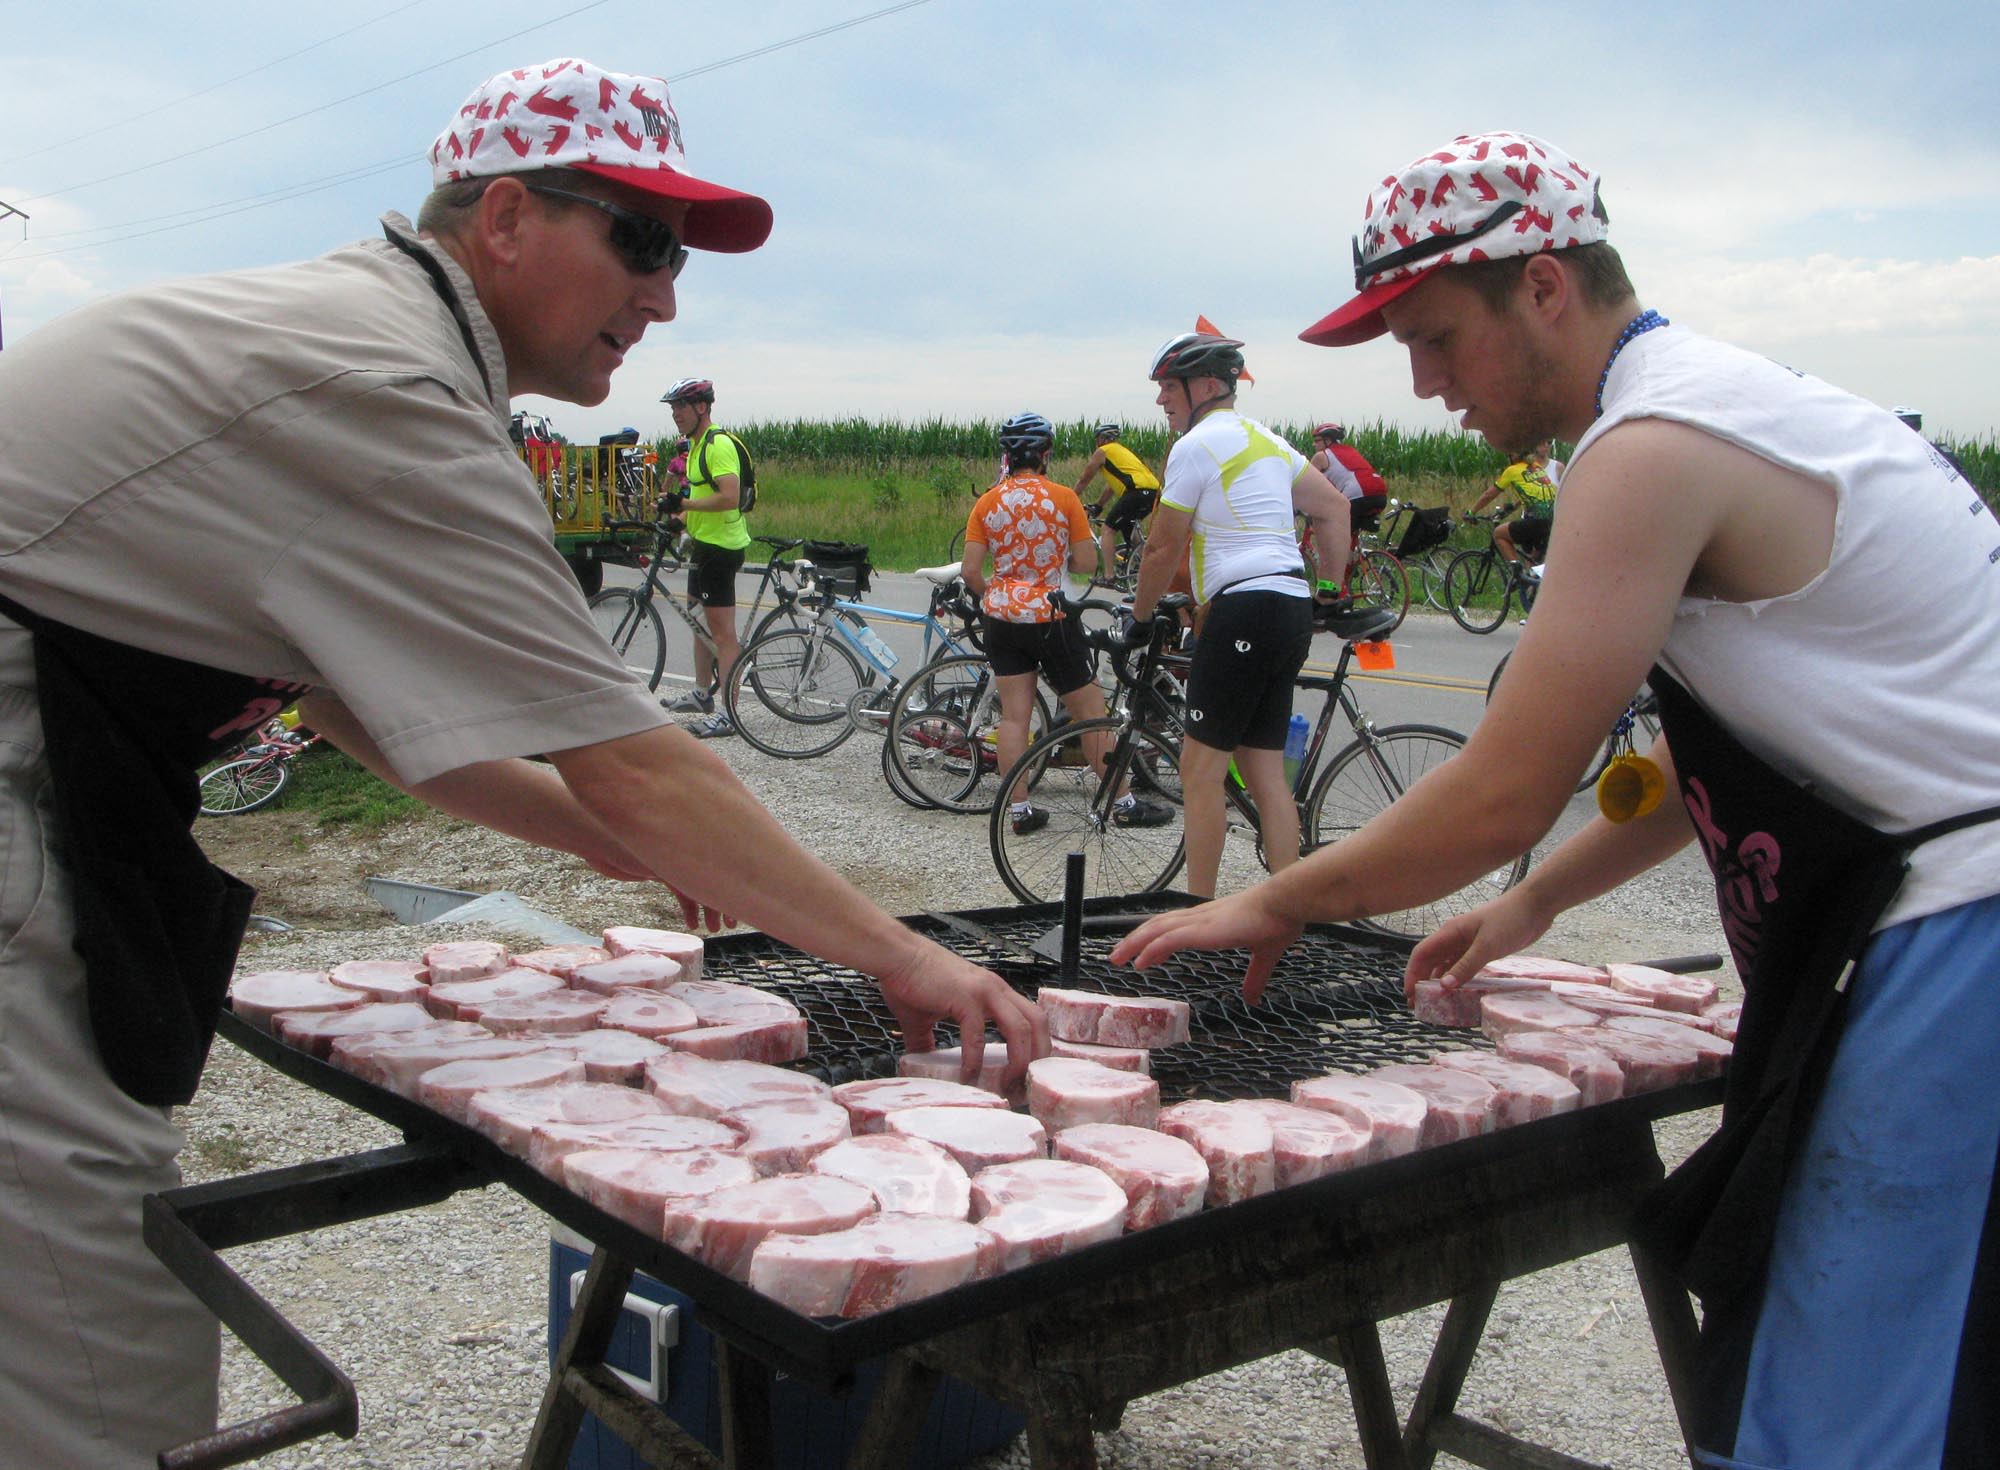 A new Mr. Pork Chop and family are ready to carry on their 40-year-plus RAGBRAI tradition